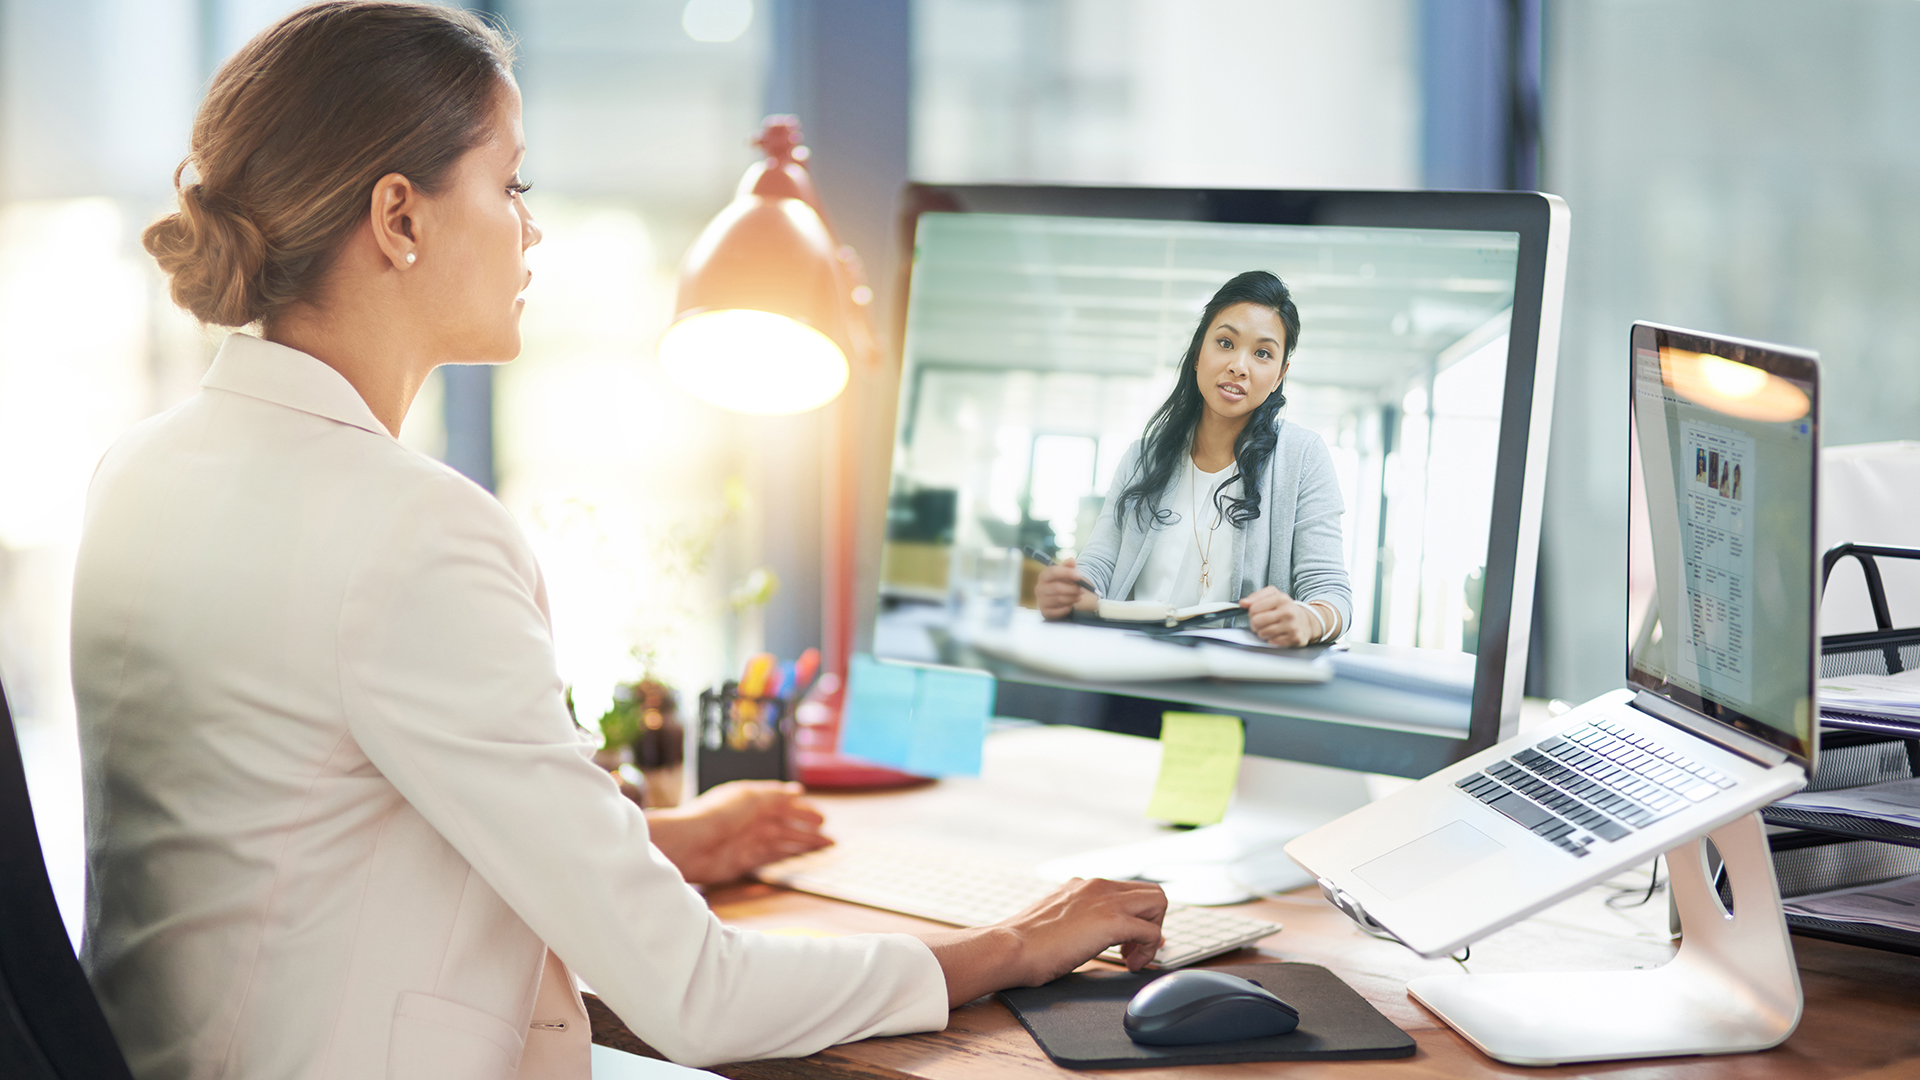 Businesswoman sitting in front of a laptop talking to a remote worker who is visible on the monitor.